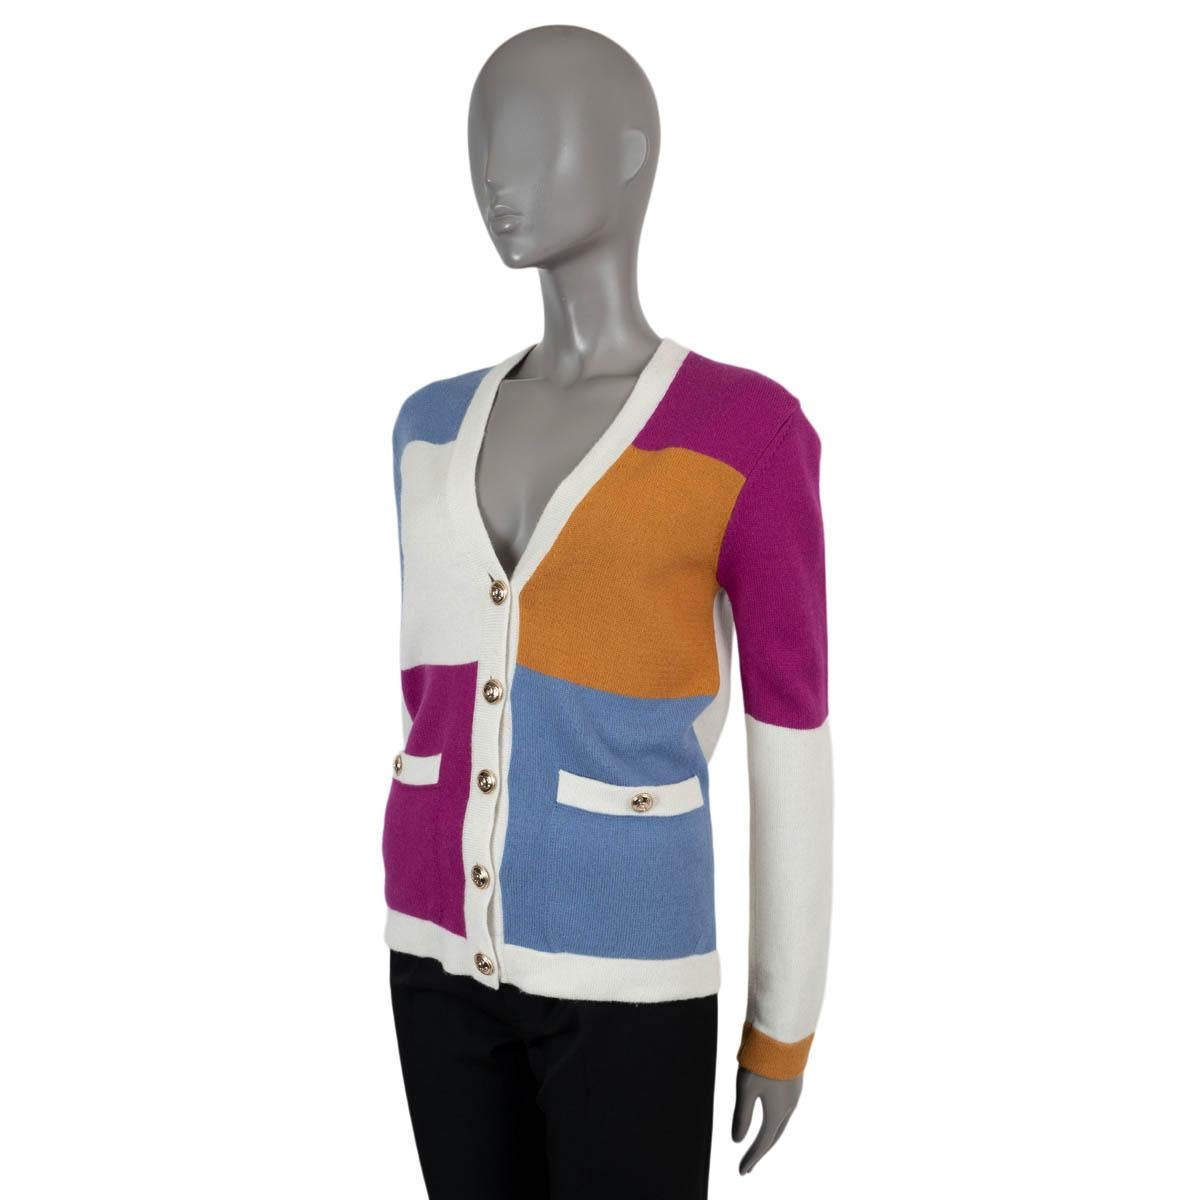 100% authentic Chanel colorblock cardigan in cream,pink, blue and camel cashmere (100%). Features rib-knit V-neck, hem and cuffs and two buttoned patch pockets. Closes with gold-tone CC buttons. Unlined. Has been worn and is in excellent condition.